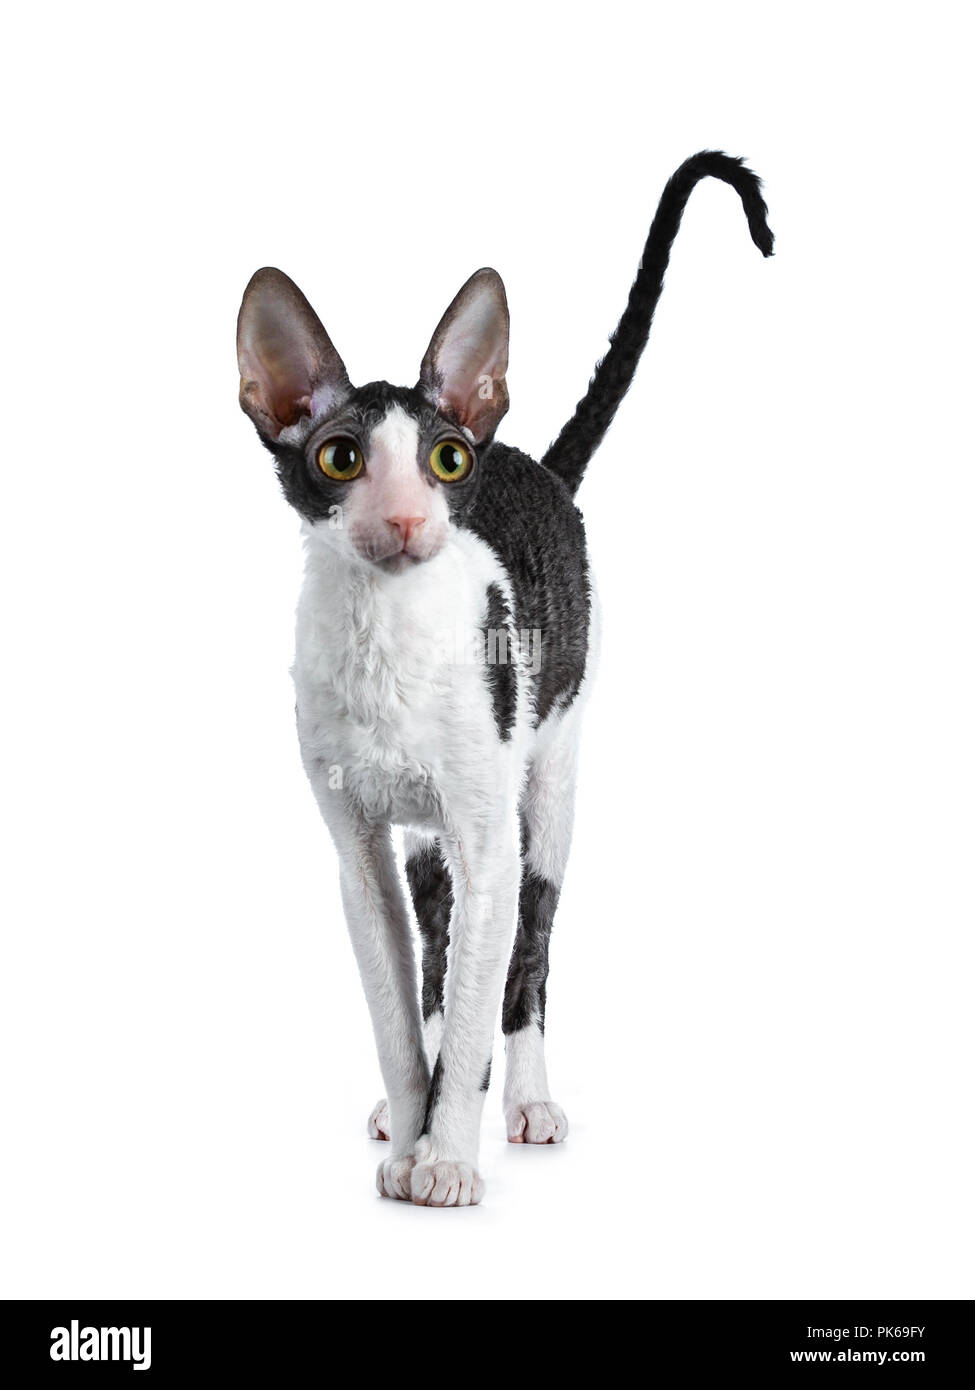 Amazing black bicolor Cornish Rex cat kitten girl standing facing front with tail fierce in air, looking curious beside camera isolated on a white bac Stock Photo